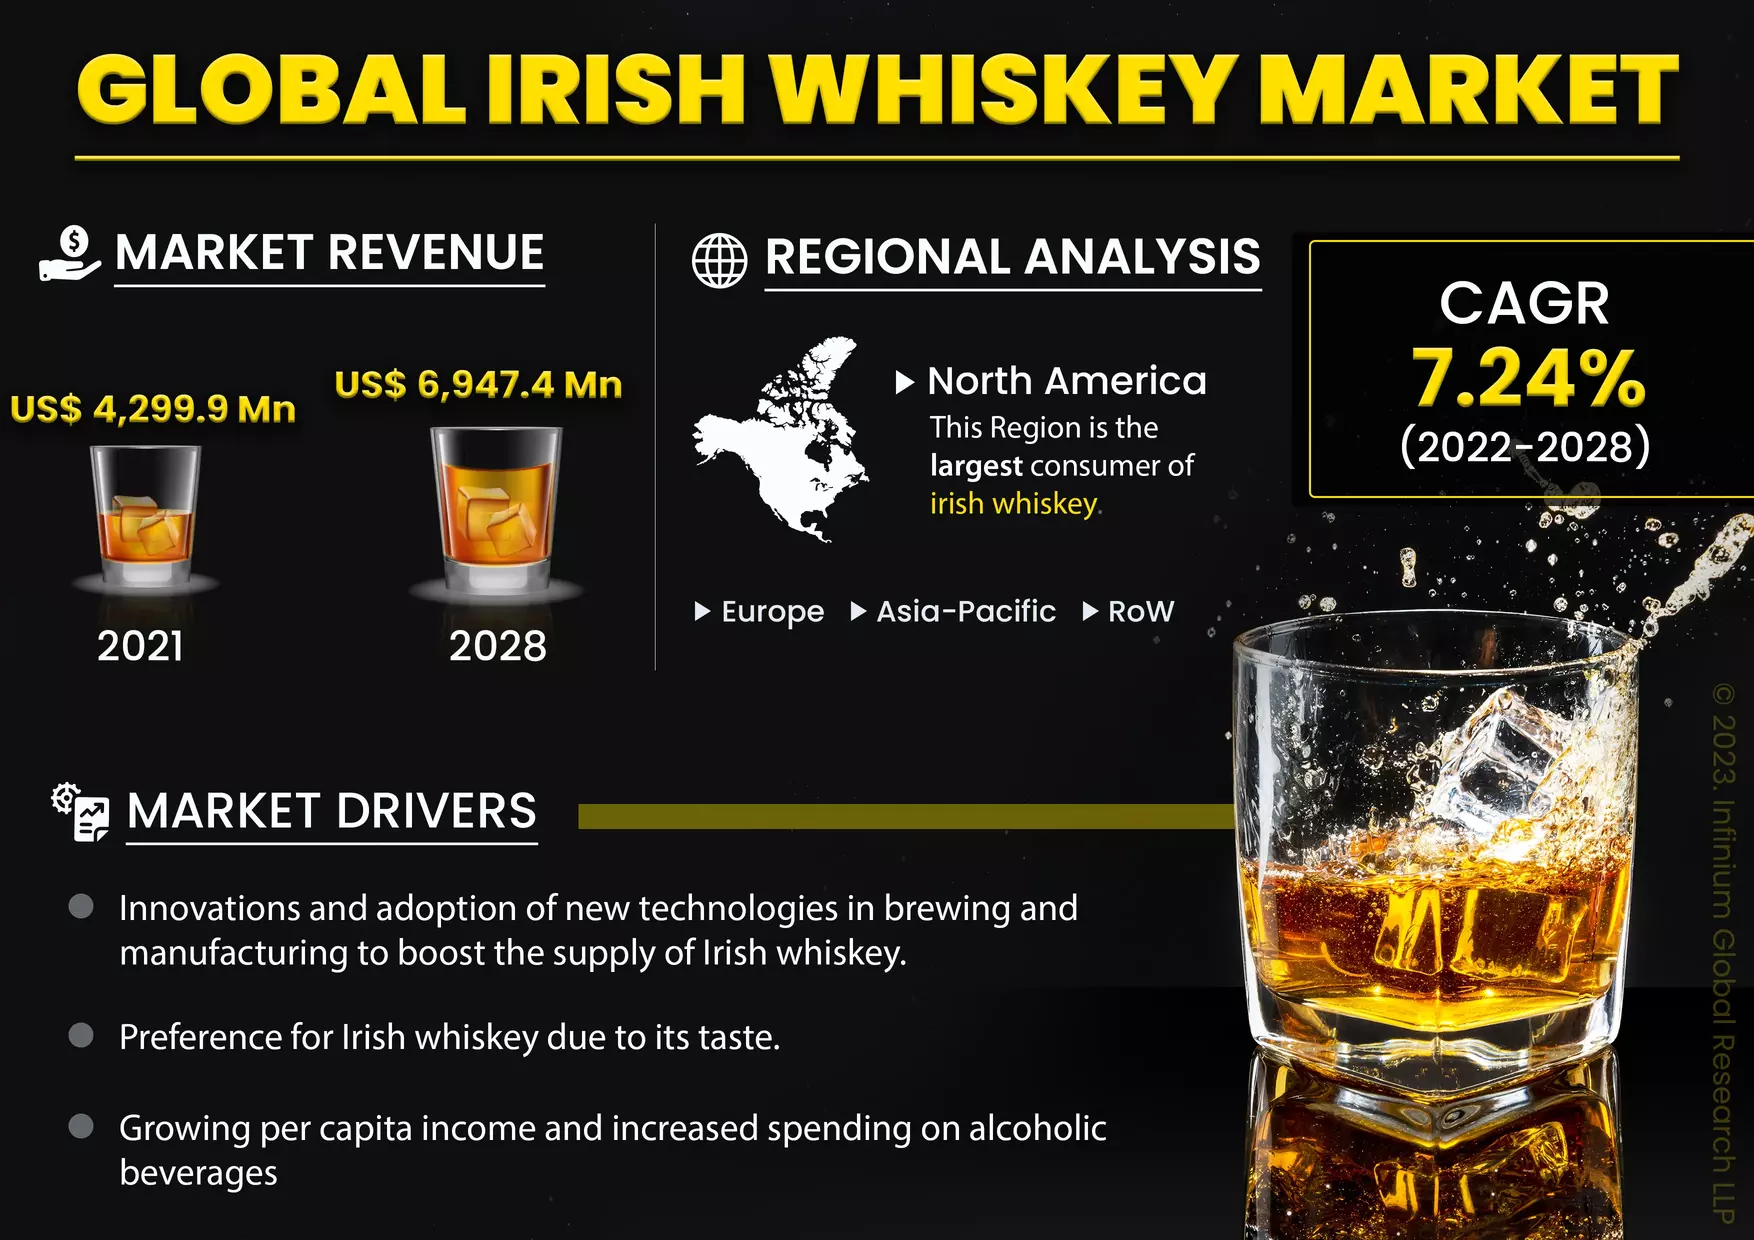 Global Irish Whiskey Market was Valued at About USD 4.5 Billion in 2022 and is Expected to Reach Nearly USD 7 Billion in 2028, with a CAGR of Over 7% During the Forecast Period.